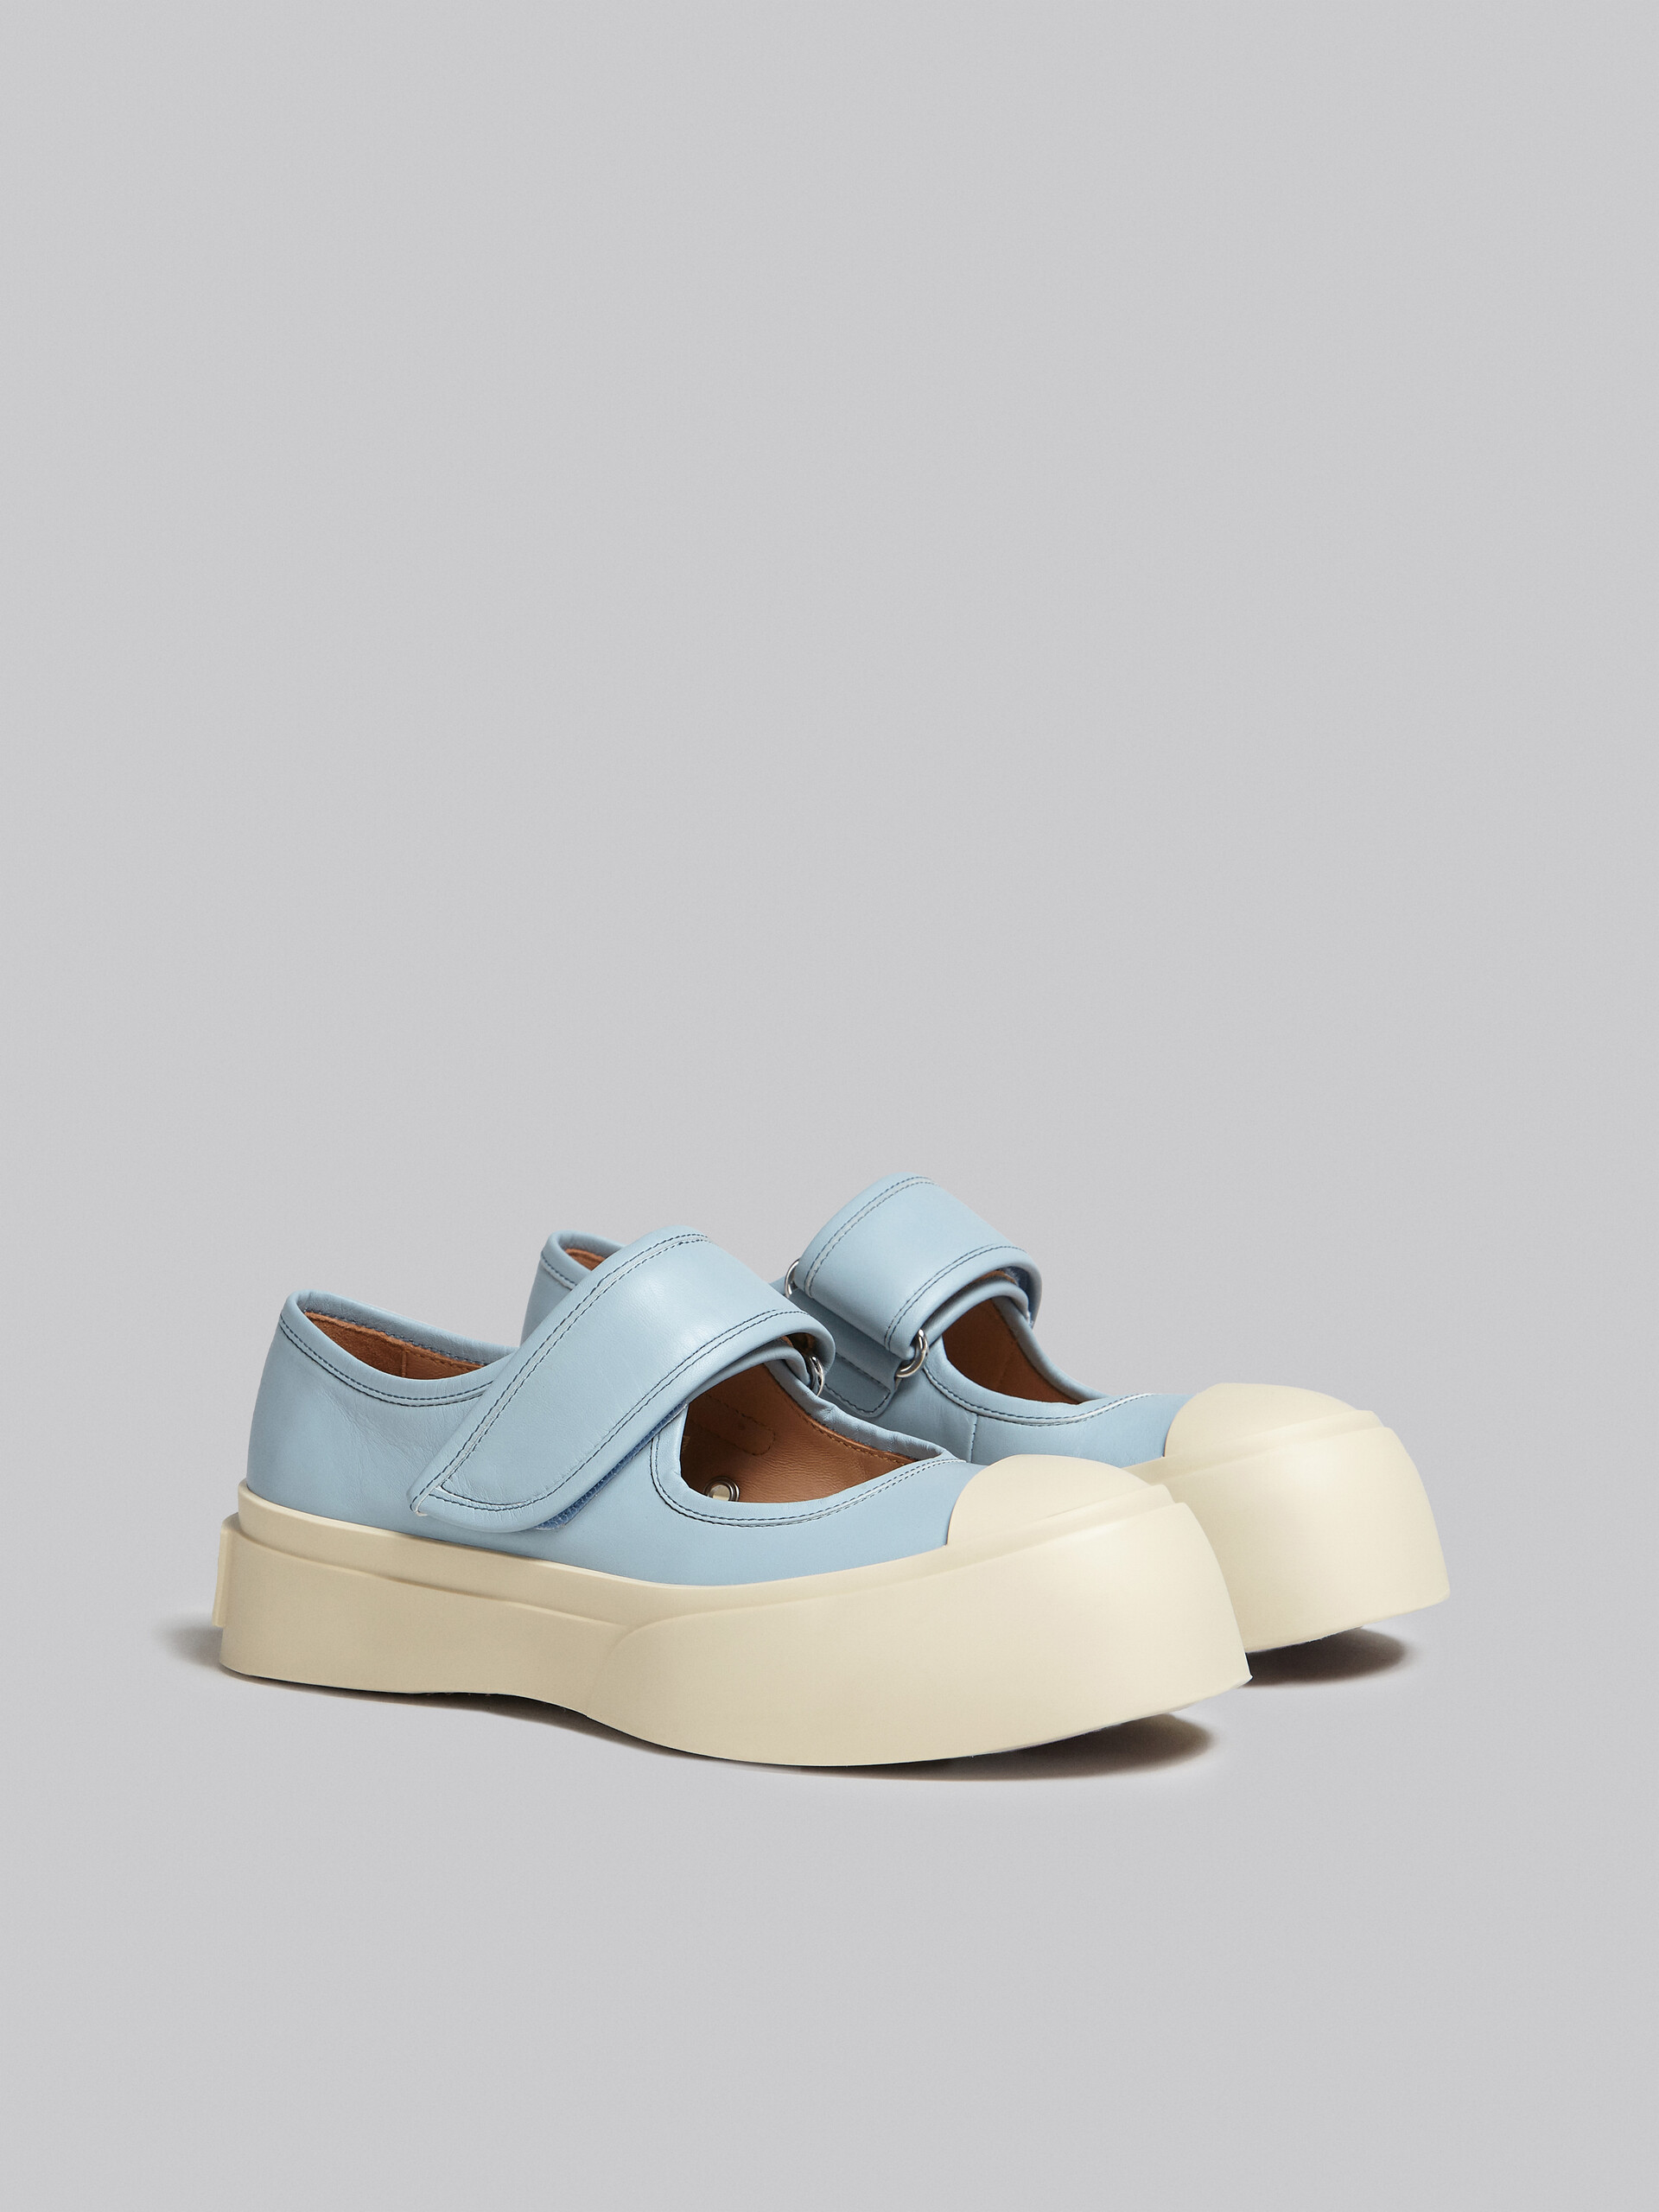 Light blue nappa leather Mary Jane sneaker - Sneakers - Image 2